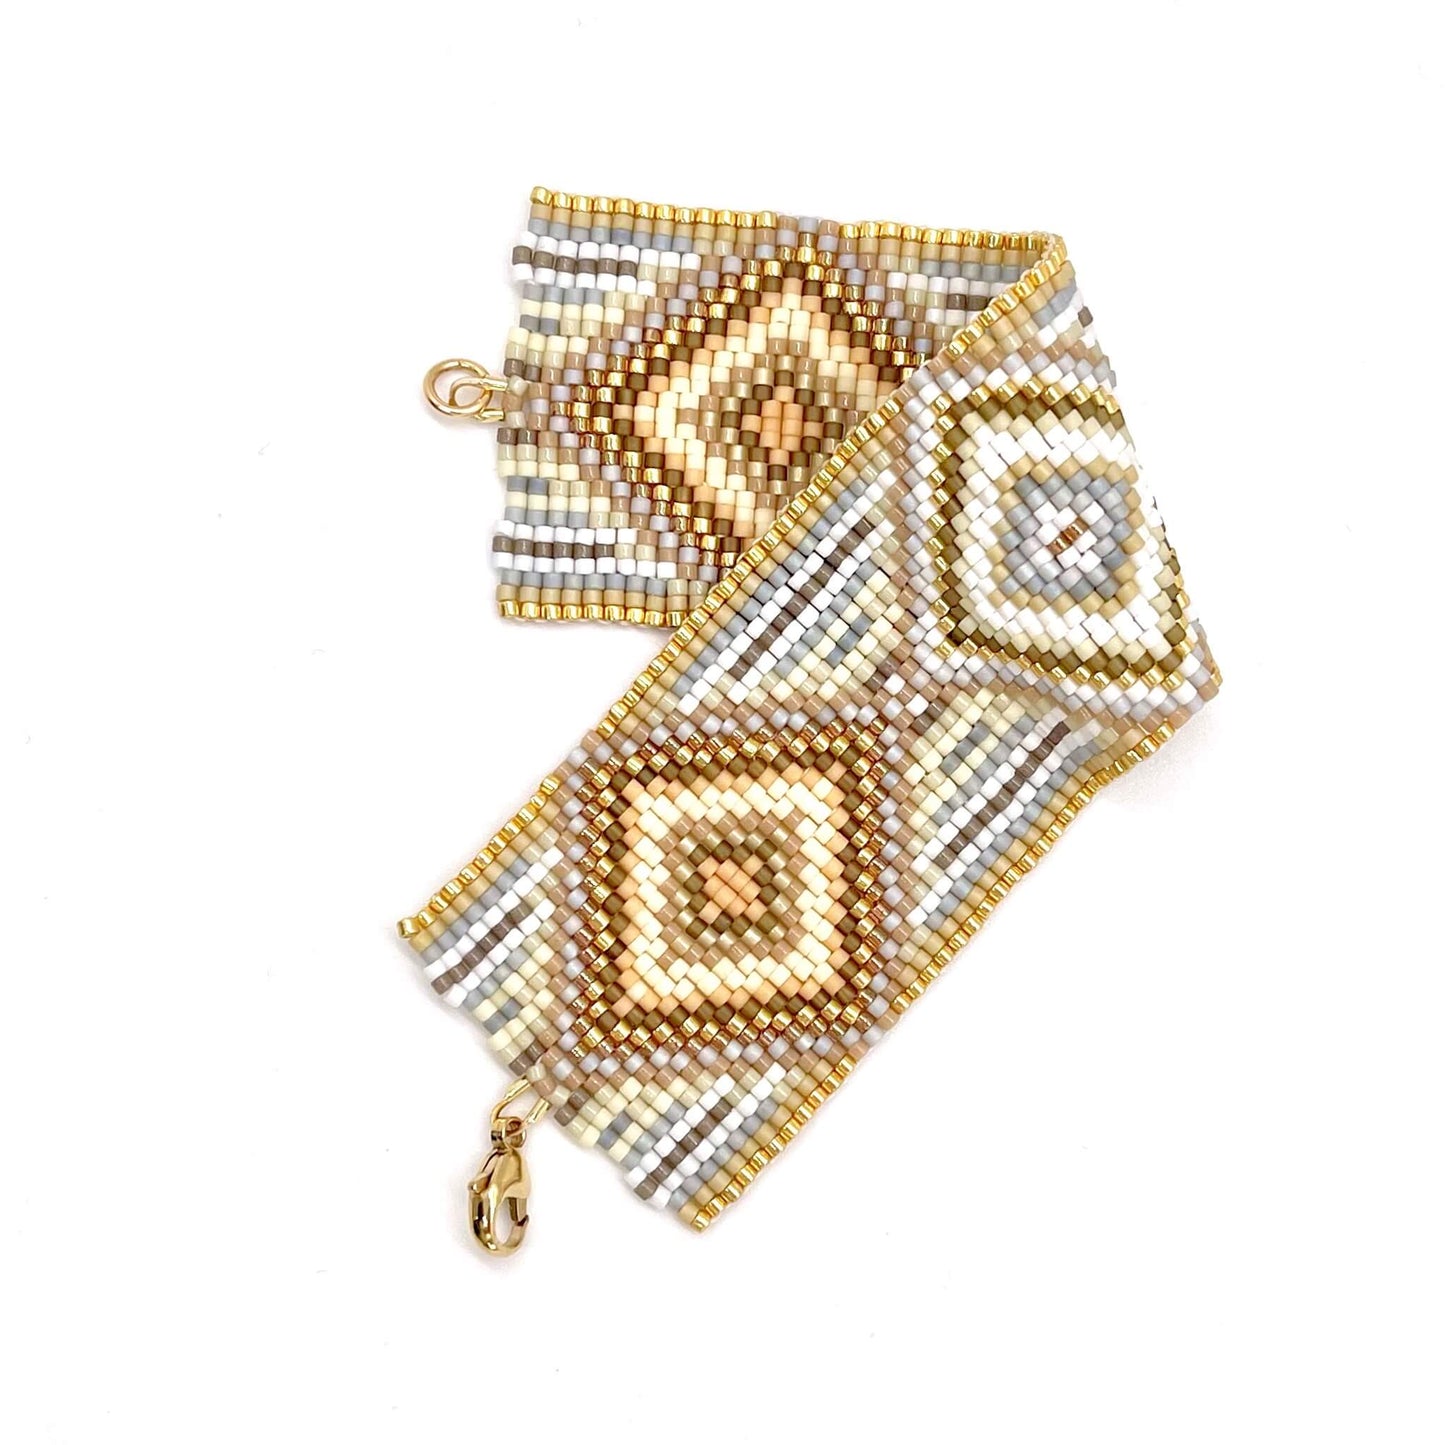 Wide hand woven peyote beaded bracelet with clasp in an intricate diamond and stripes pattern of white, tan, and gold beads.